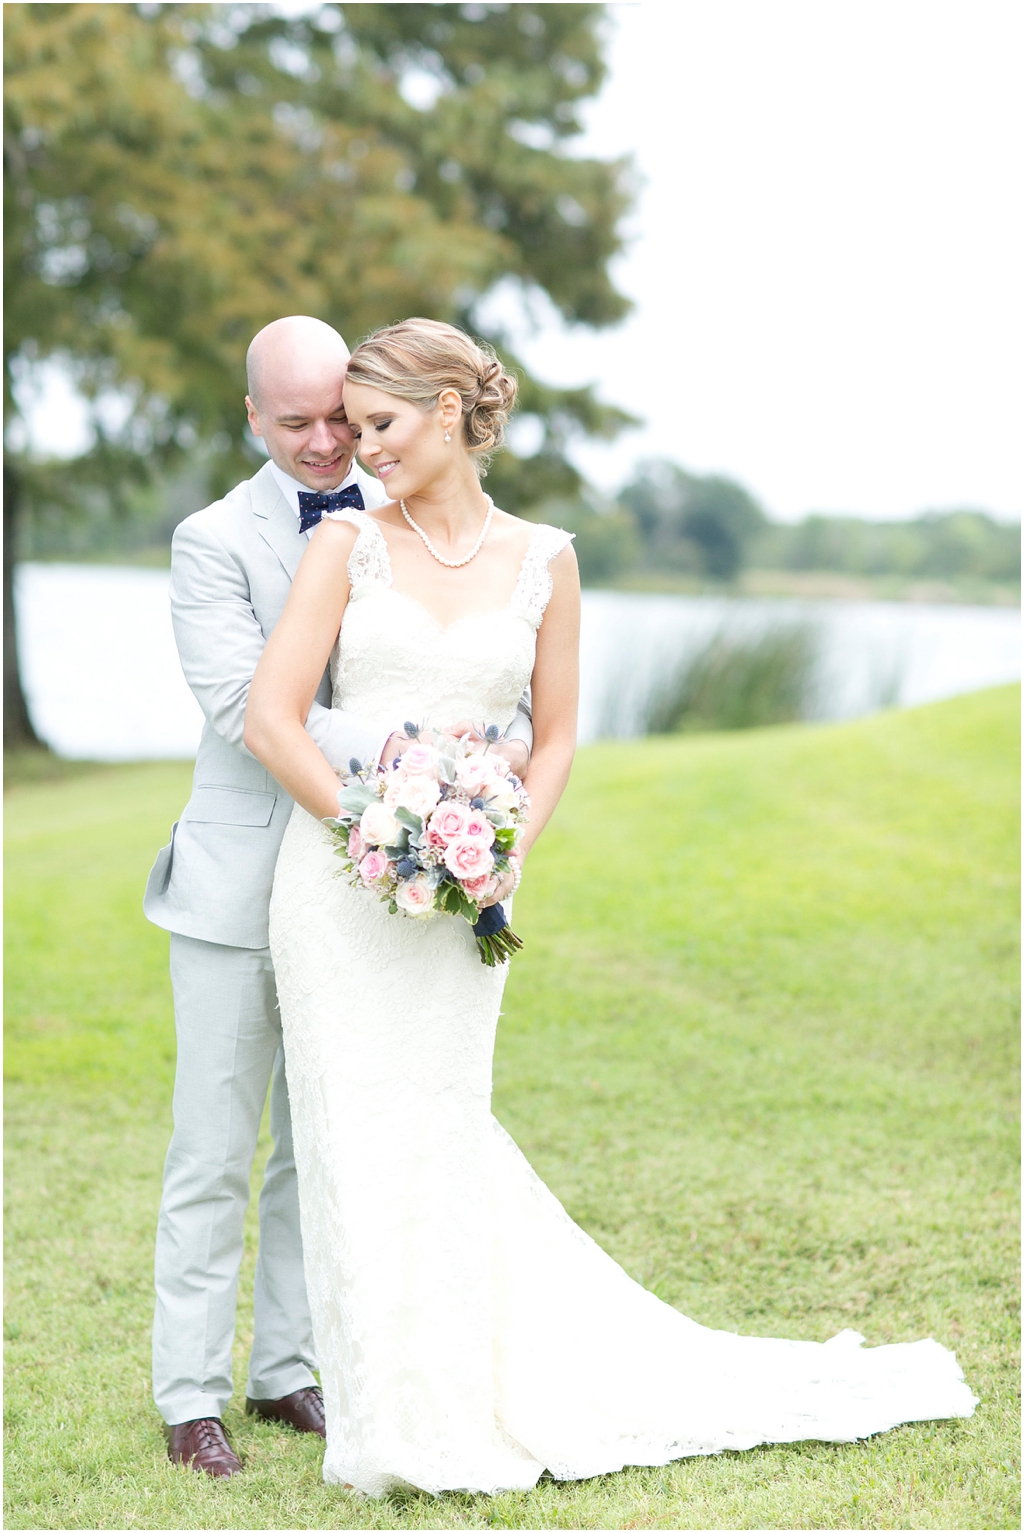 View More: http://maryfieldsphotography.pass.us/oyler-wedding-9-13-14